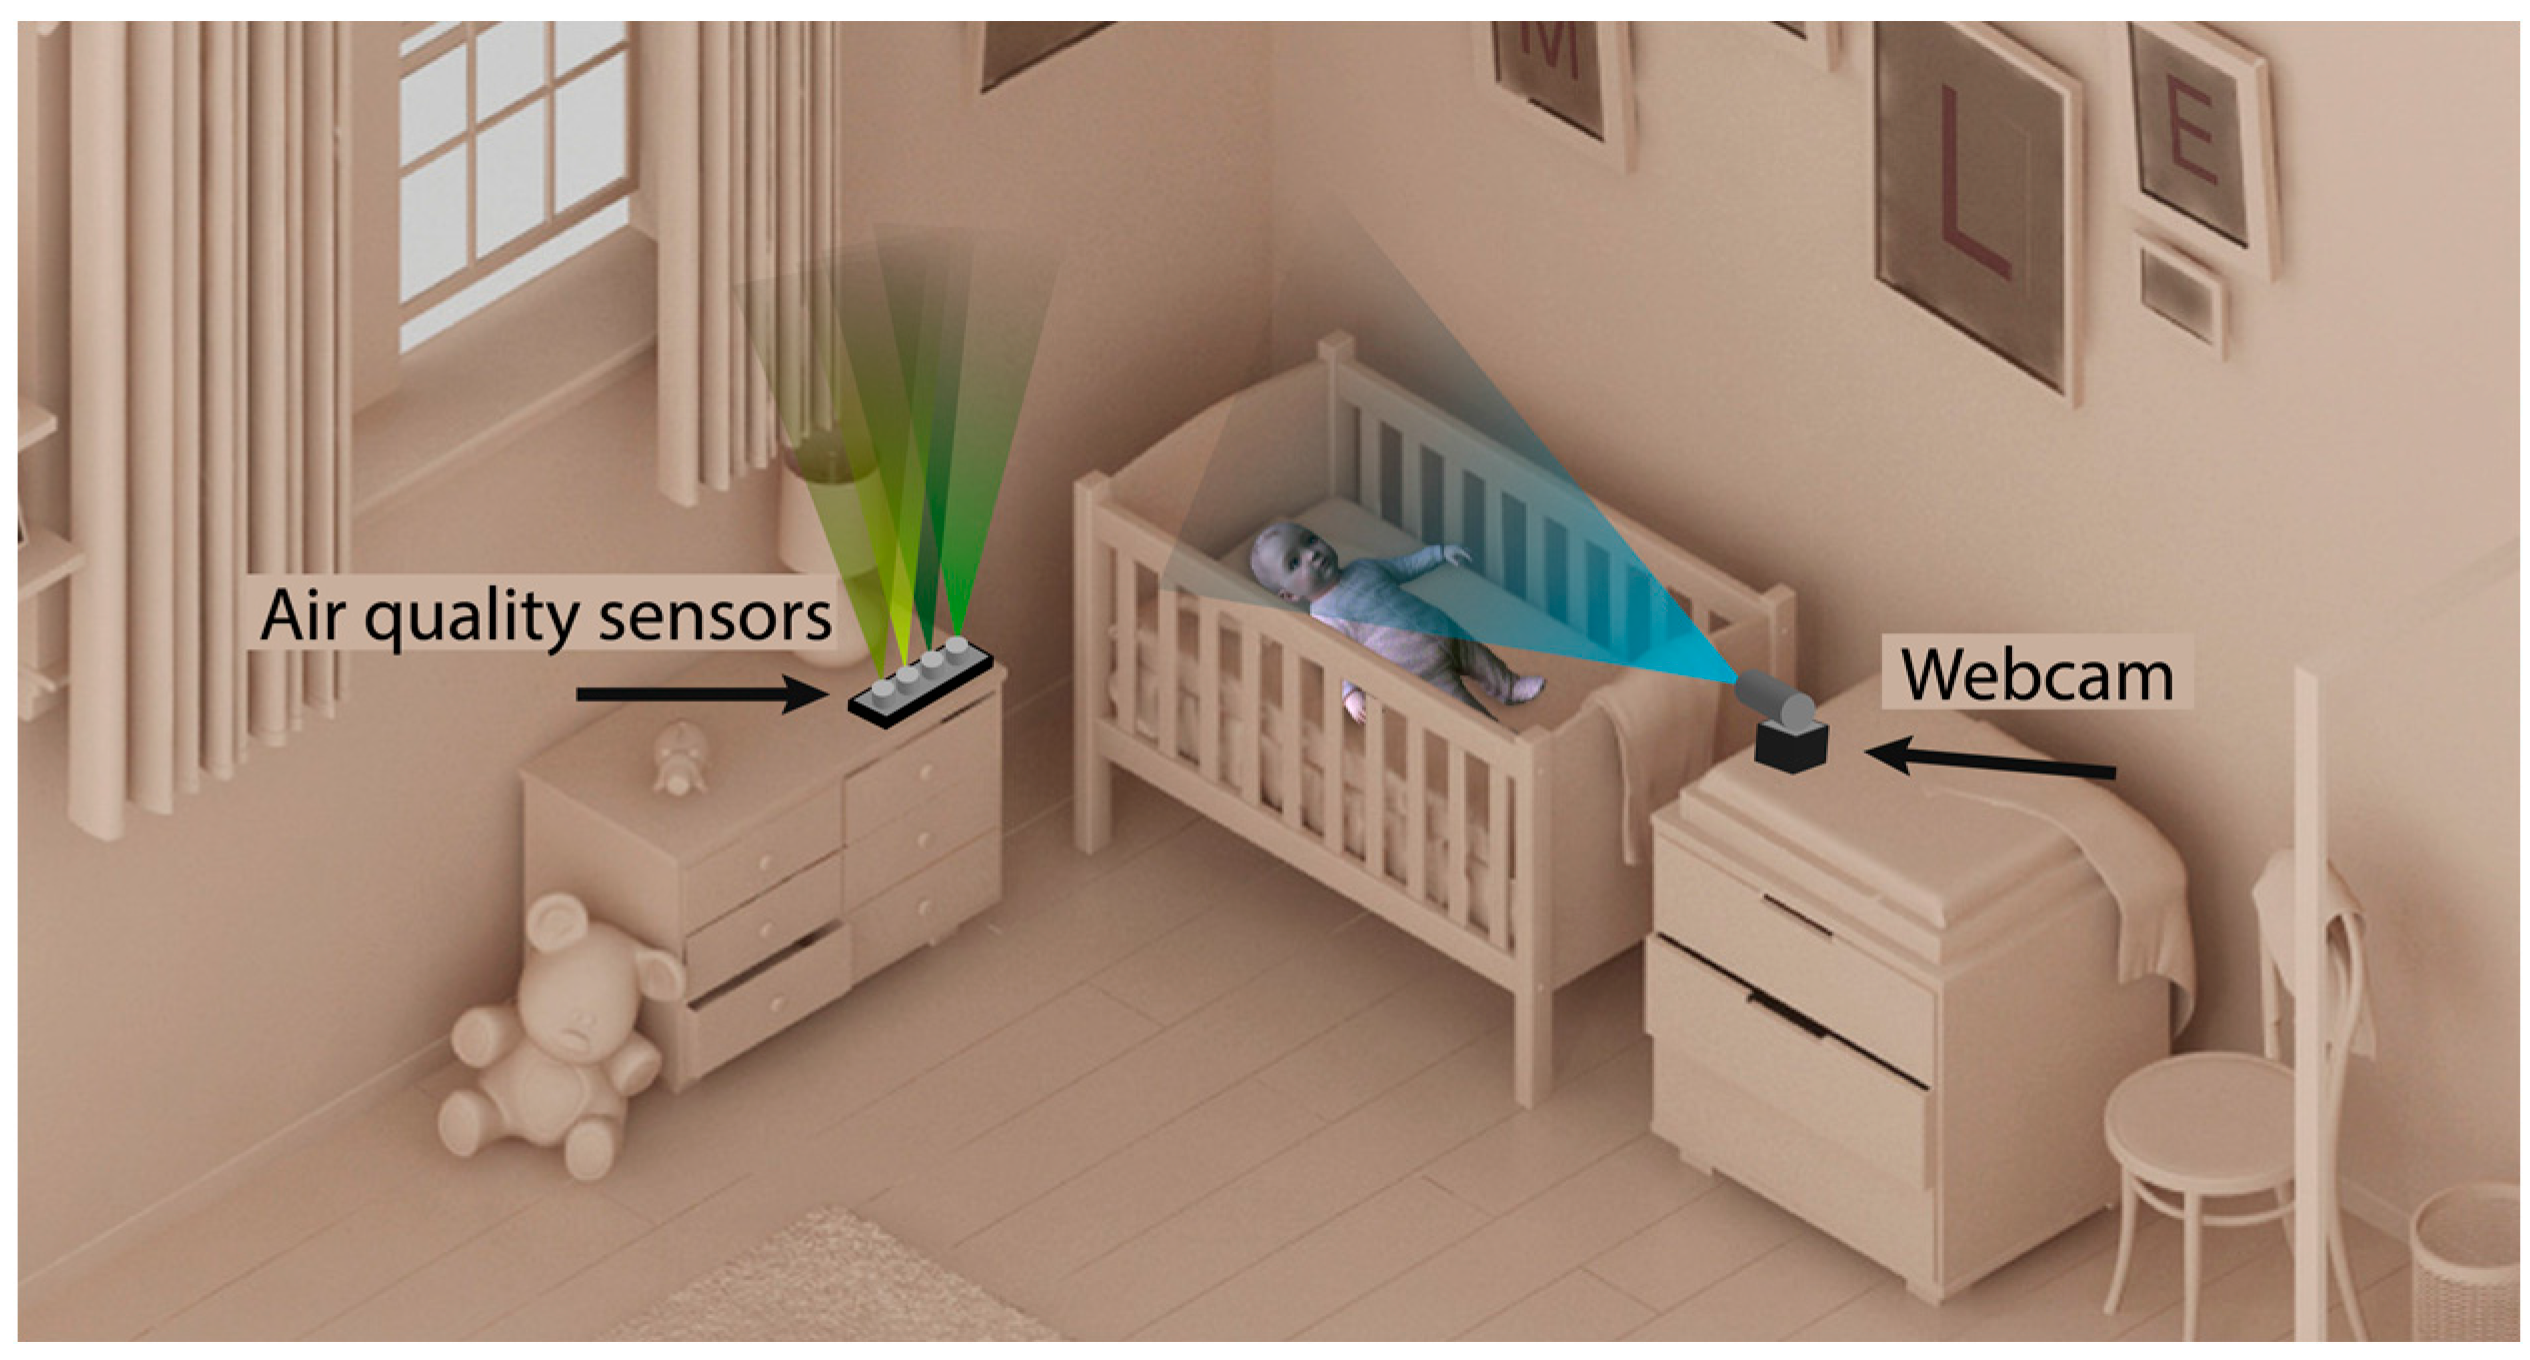 Sensors | Free Full-Text | A Context-Aware Indoor Air Quality System for  Sudden Infant Death Syndrome Prevention | HTML